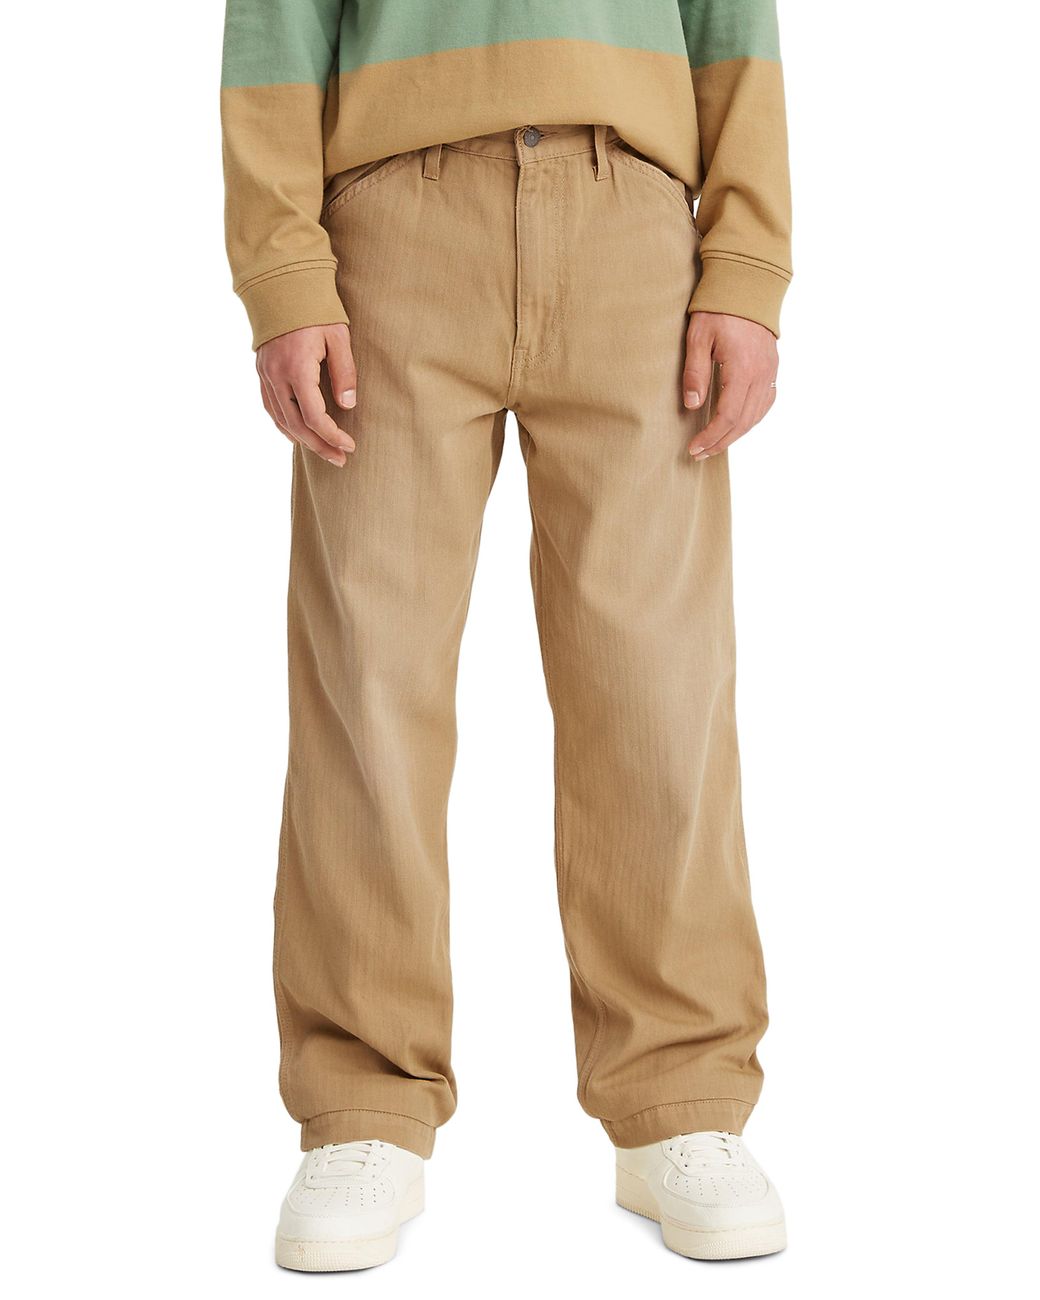 Levi's Cotton Stay Loose Carpenter Pants in Natural for Men - Lyst